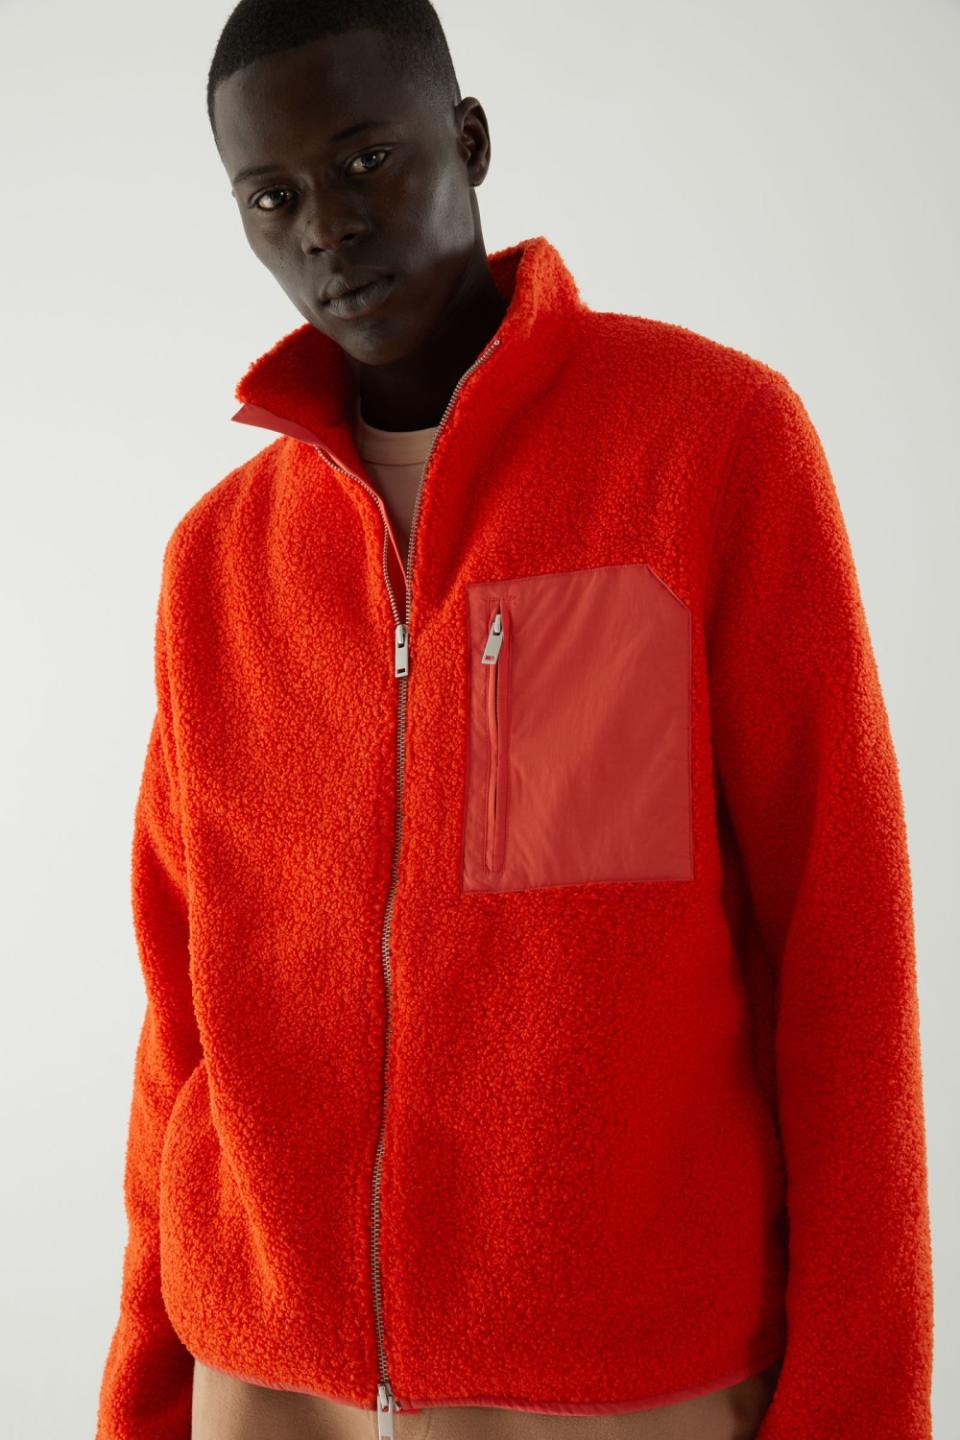 Photo of a model wearing a COS jacket.